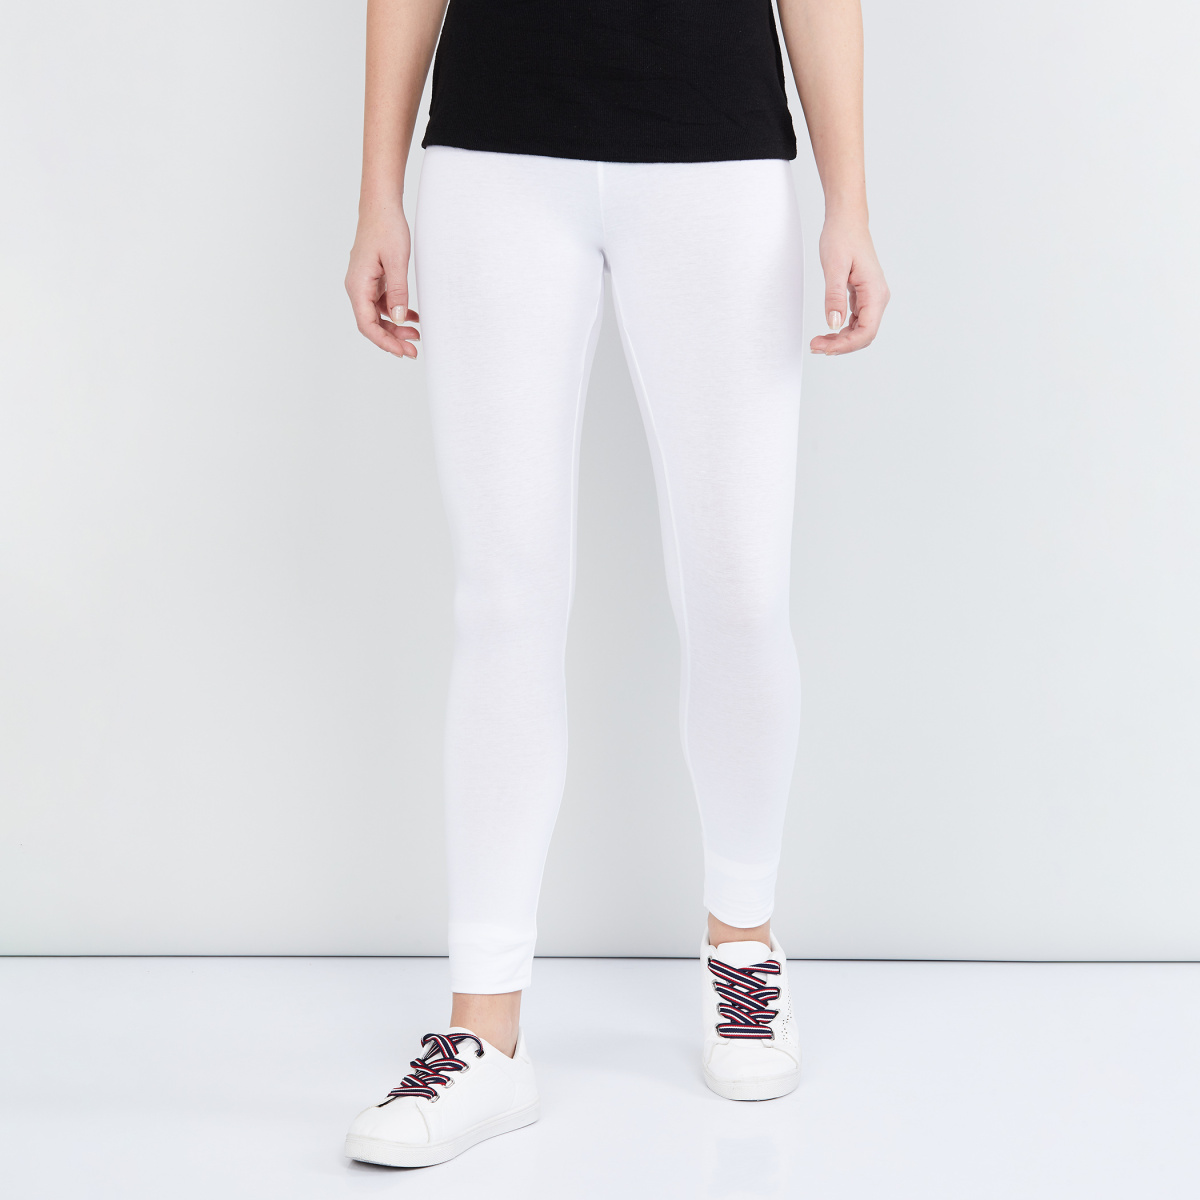 Shop Ankle Length Leggings with Cutouts Online | Max Qatar